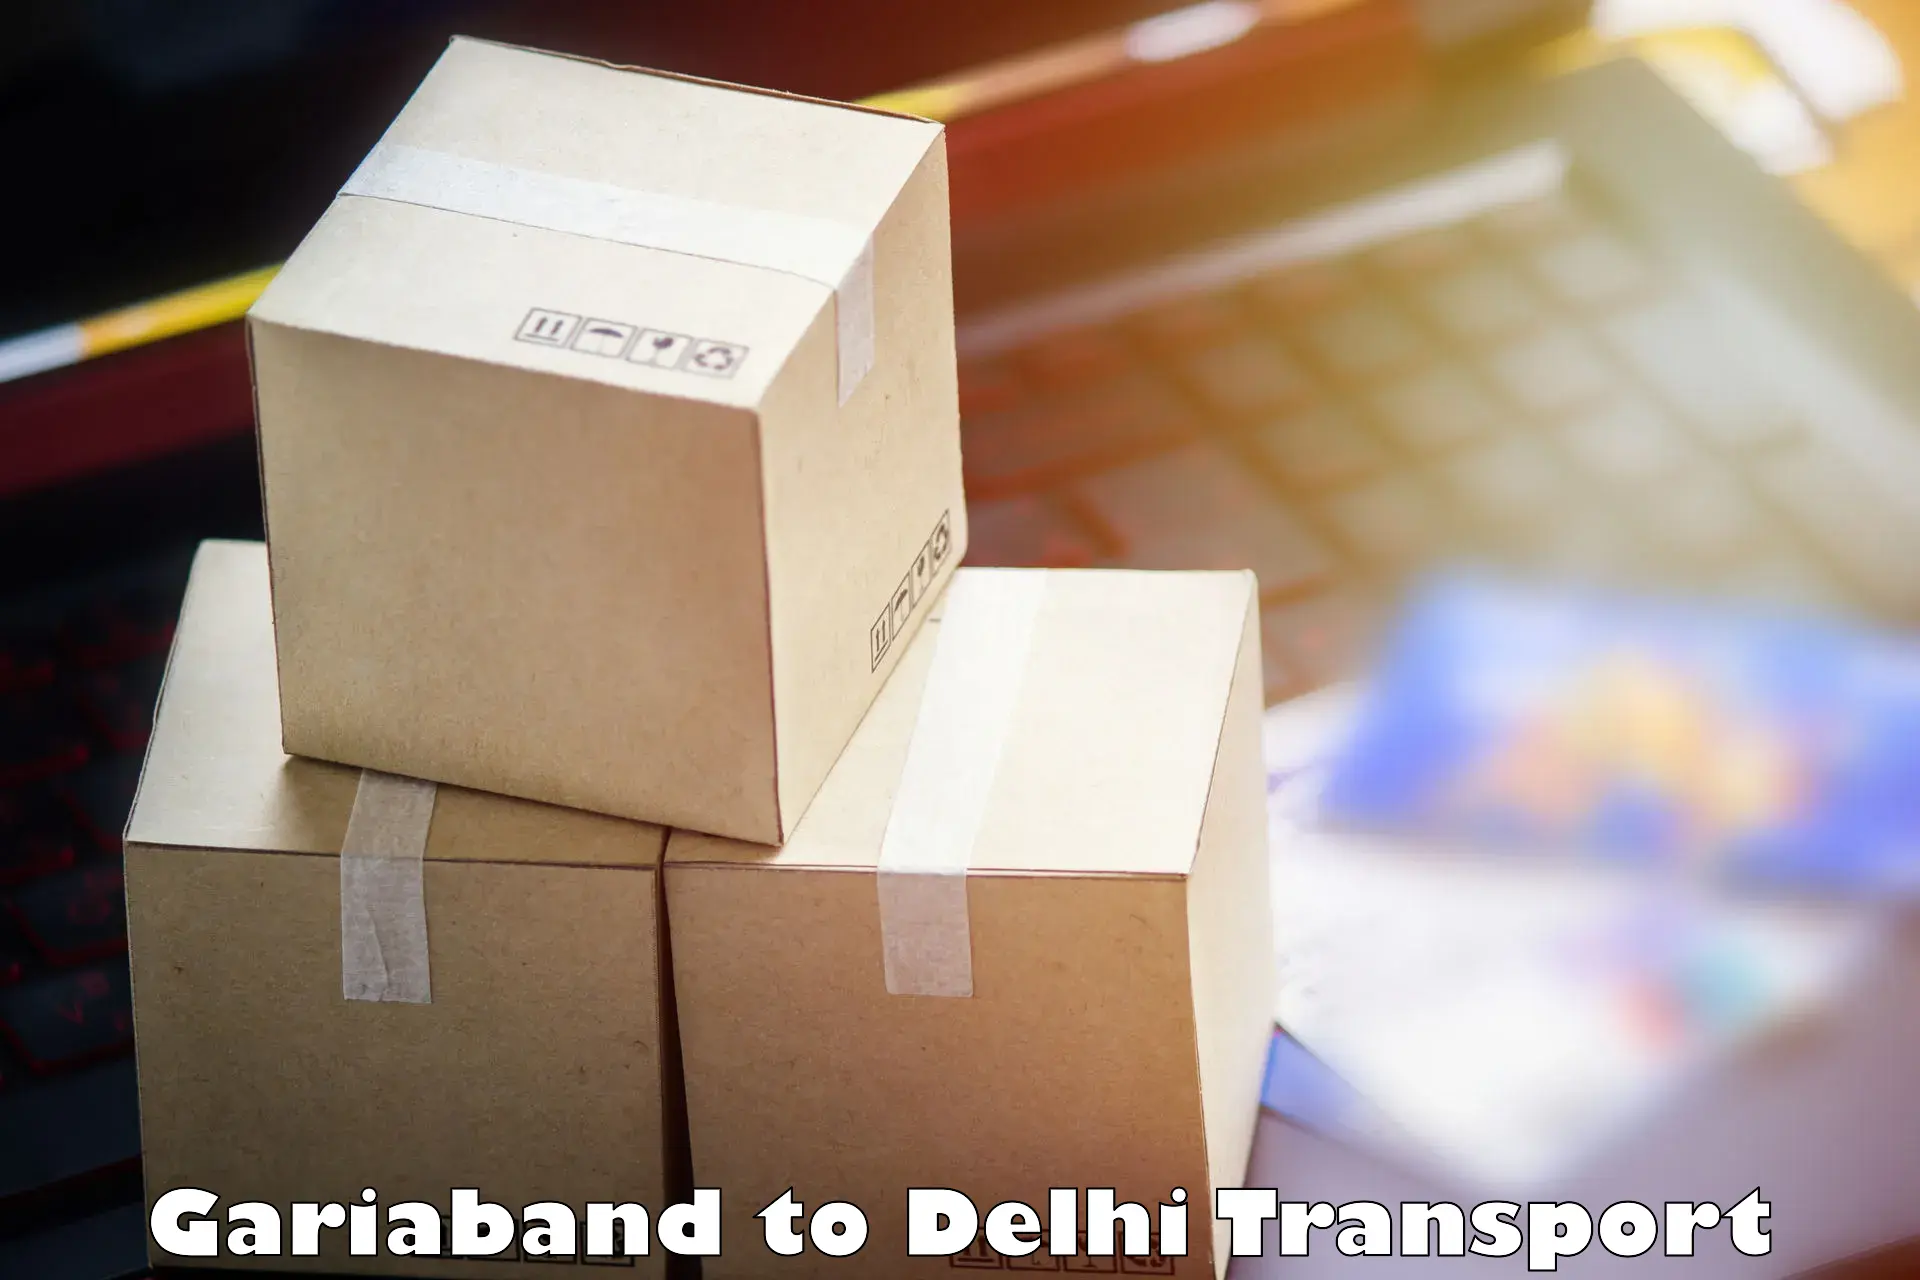 Goods delivery service Gariaband to East Delhi